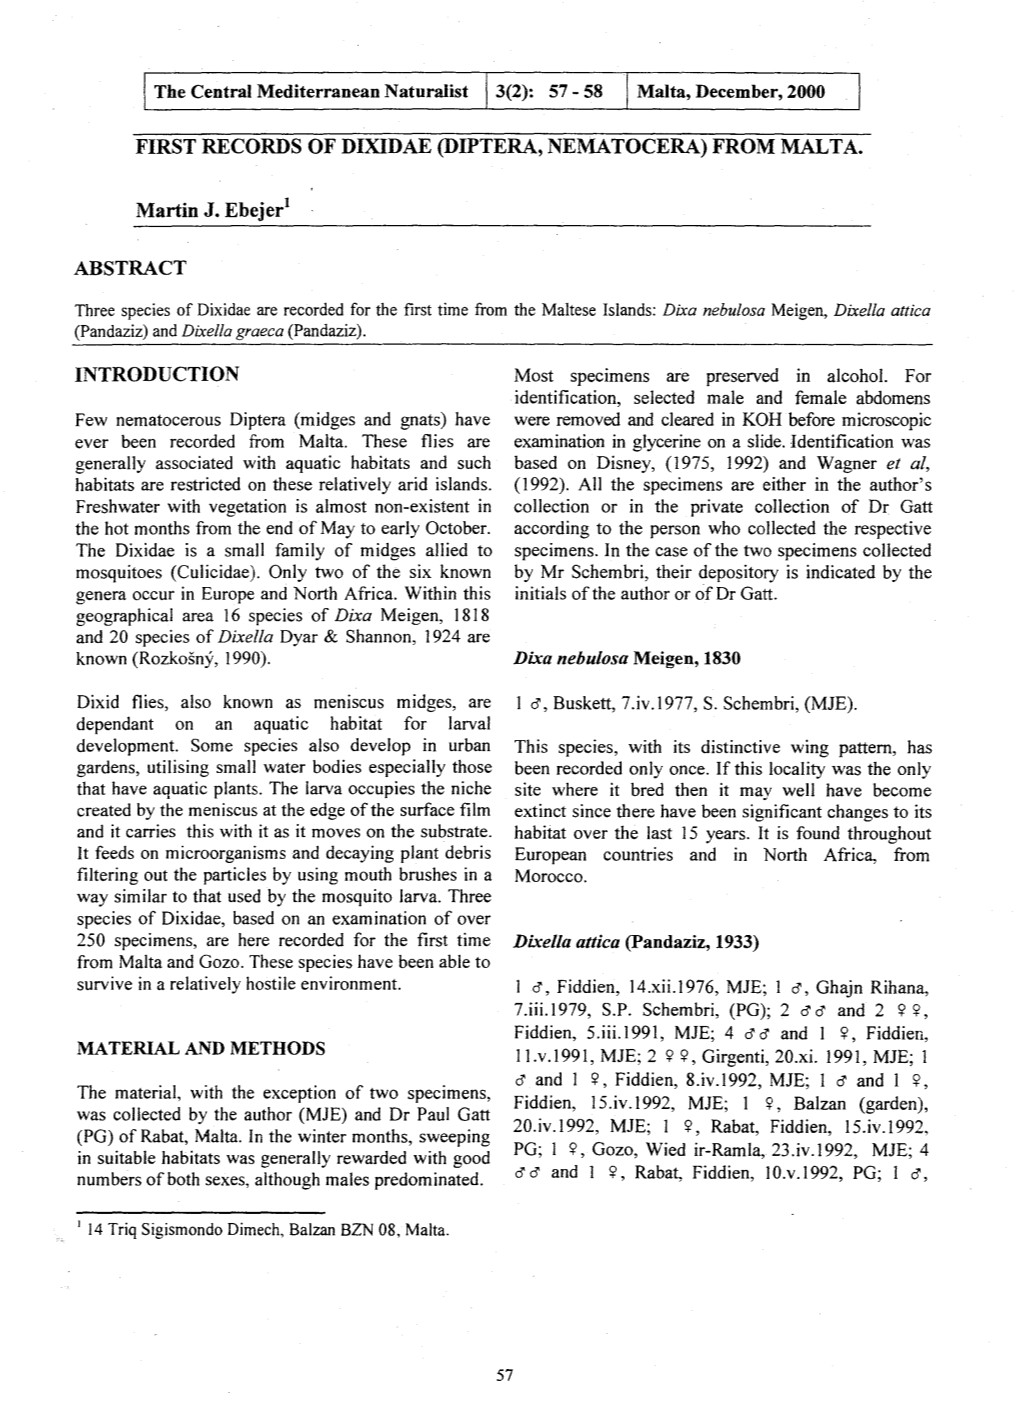 FIRST RECORDS of DIXIDAE (DIPTERA, NEMATOCERA) from MALTA. Martin J. Ebejerl ABSTRACT INTRODUCTION